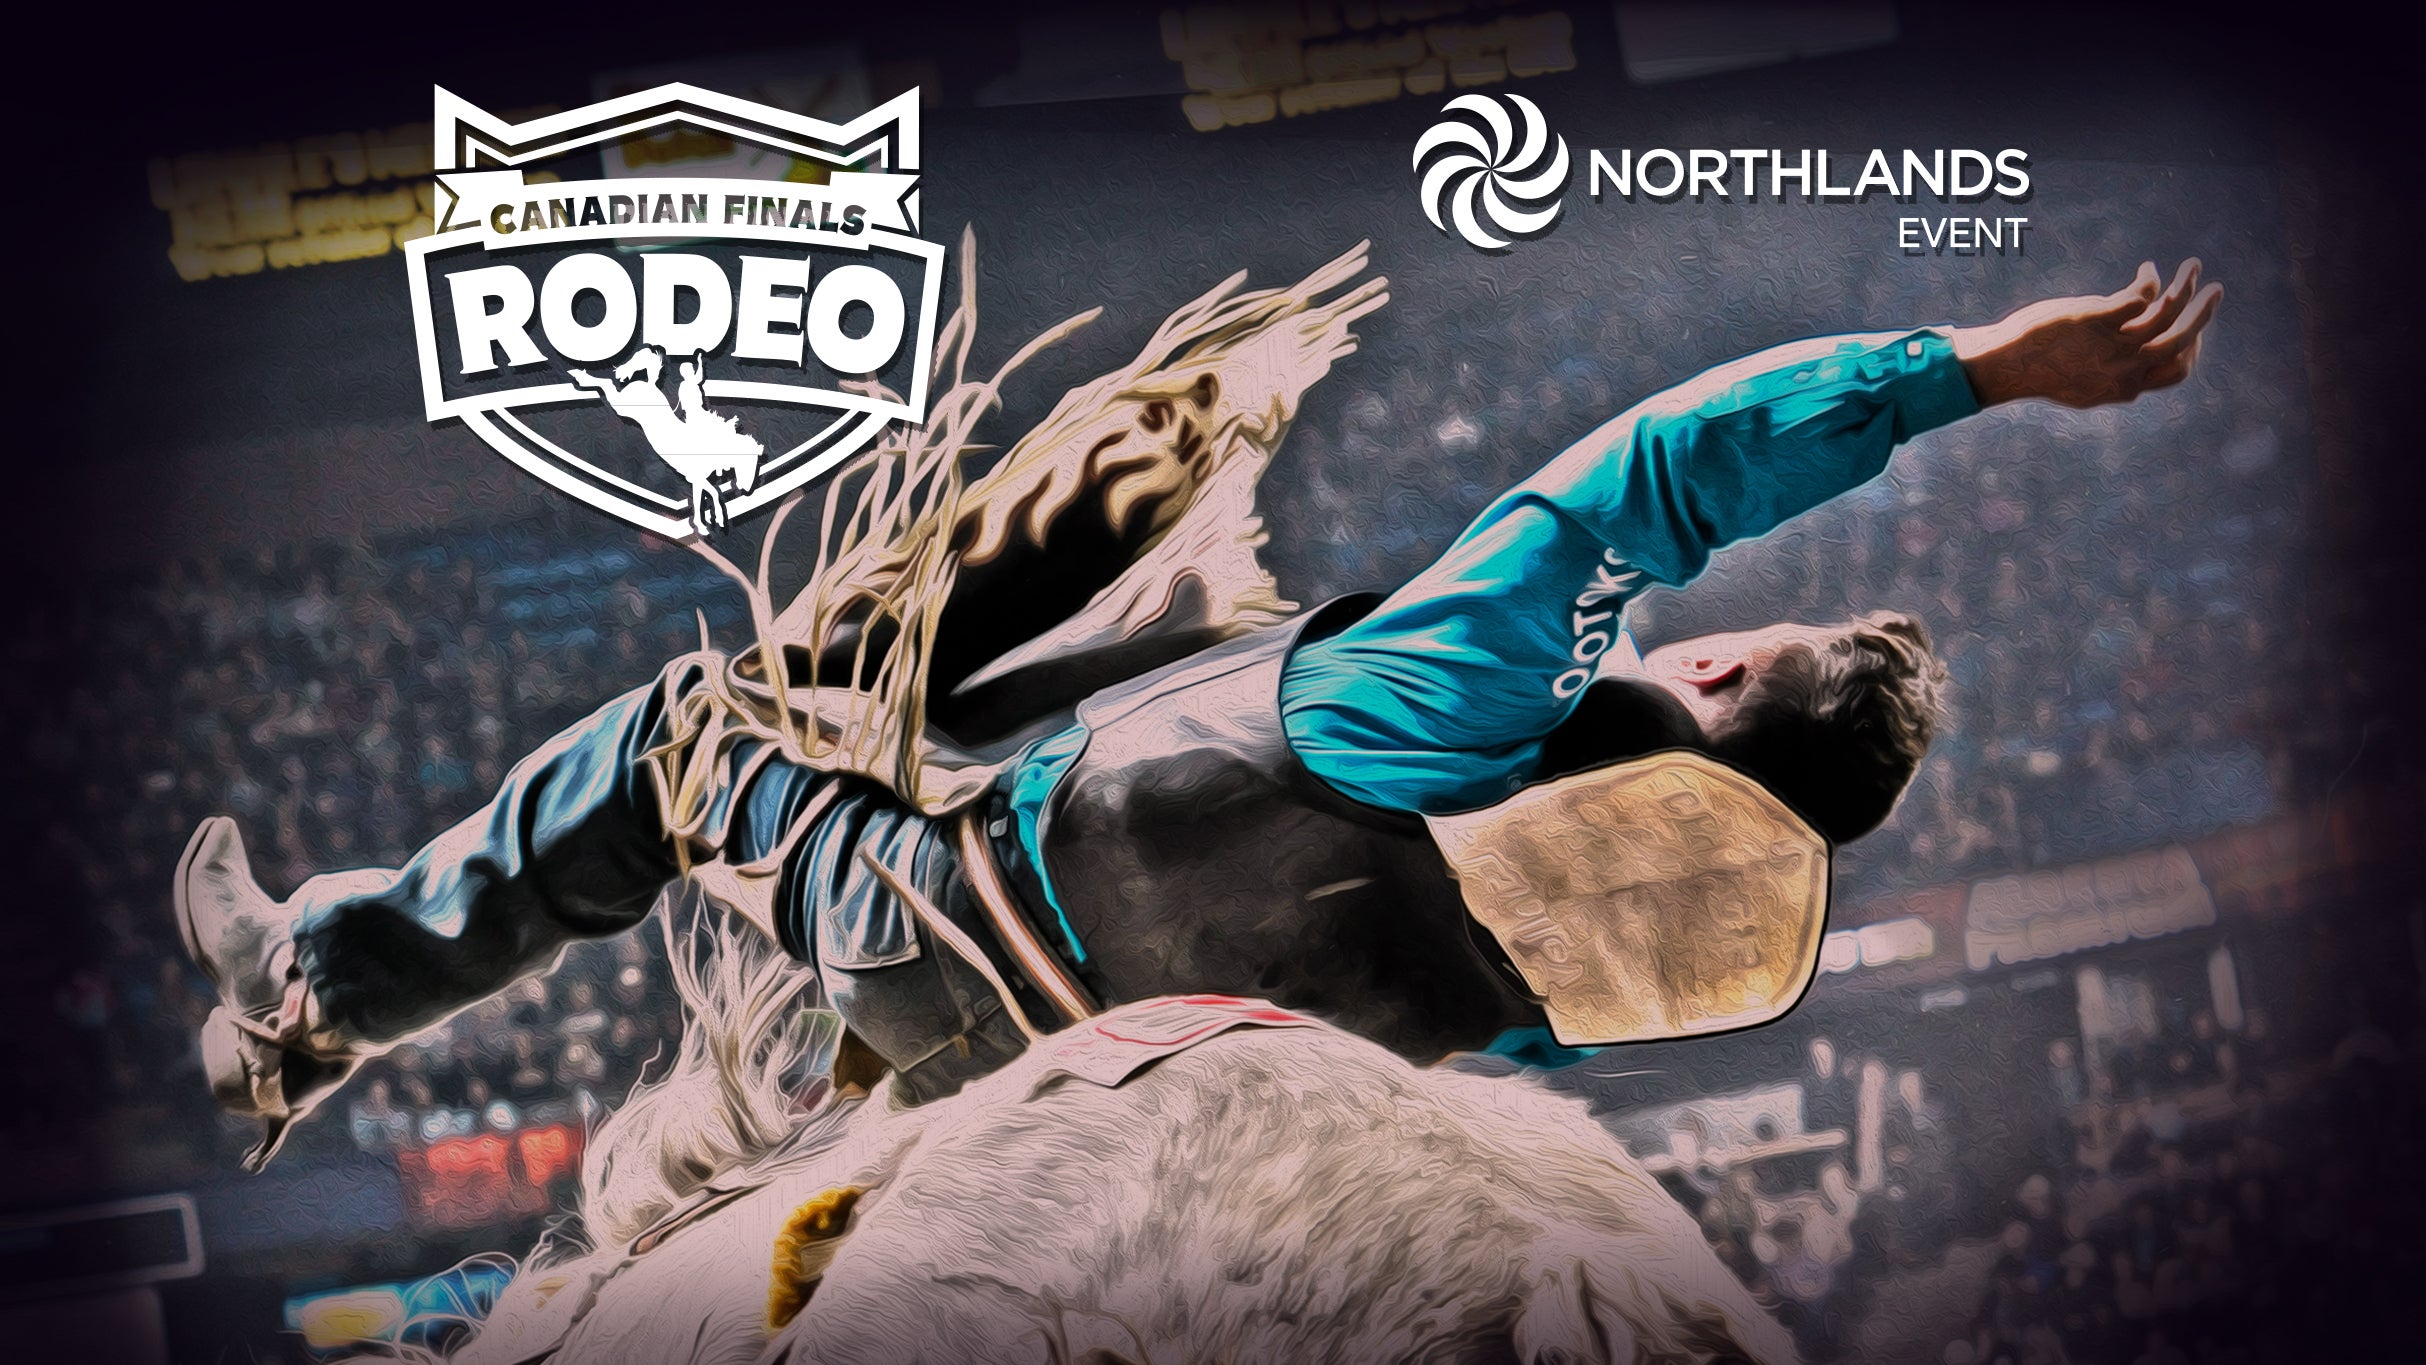 Canadian Finals Rodeo presale code for performance tickets in Edmonton, AB (Rogers Place)